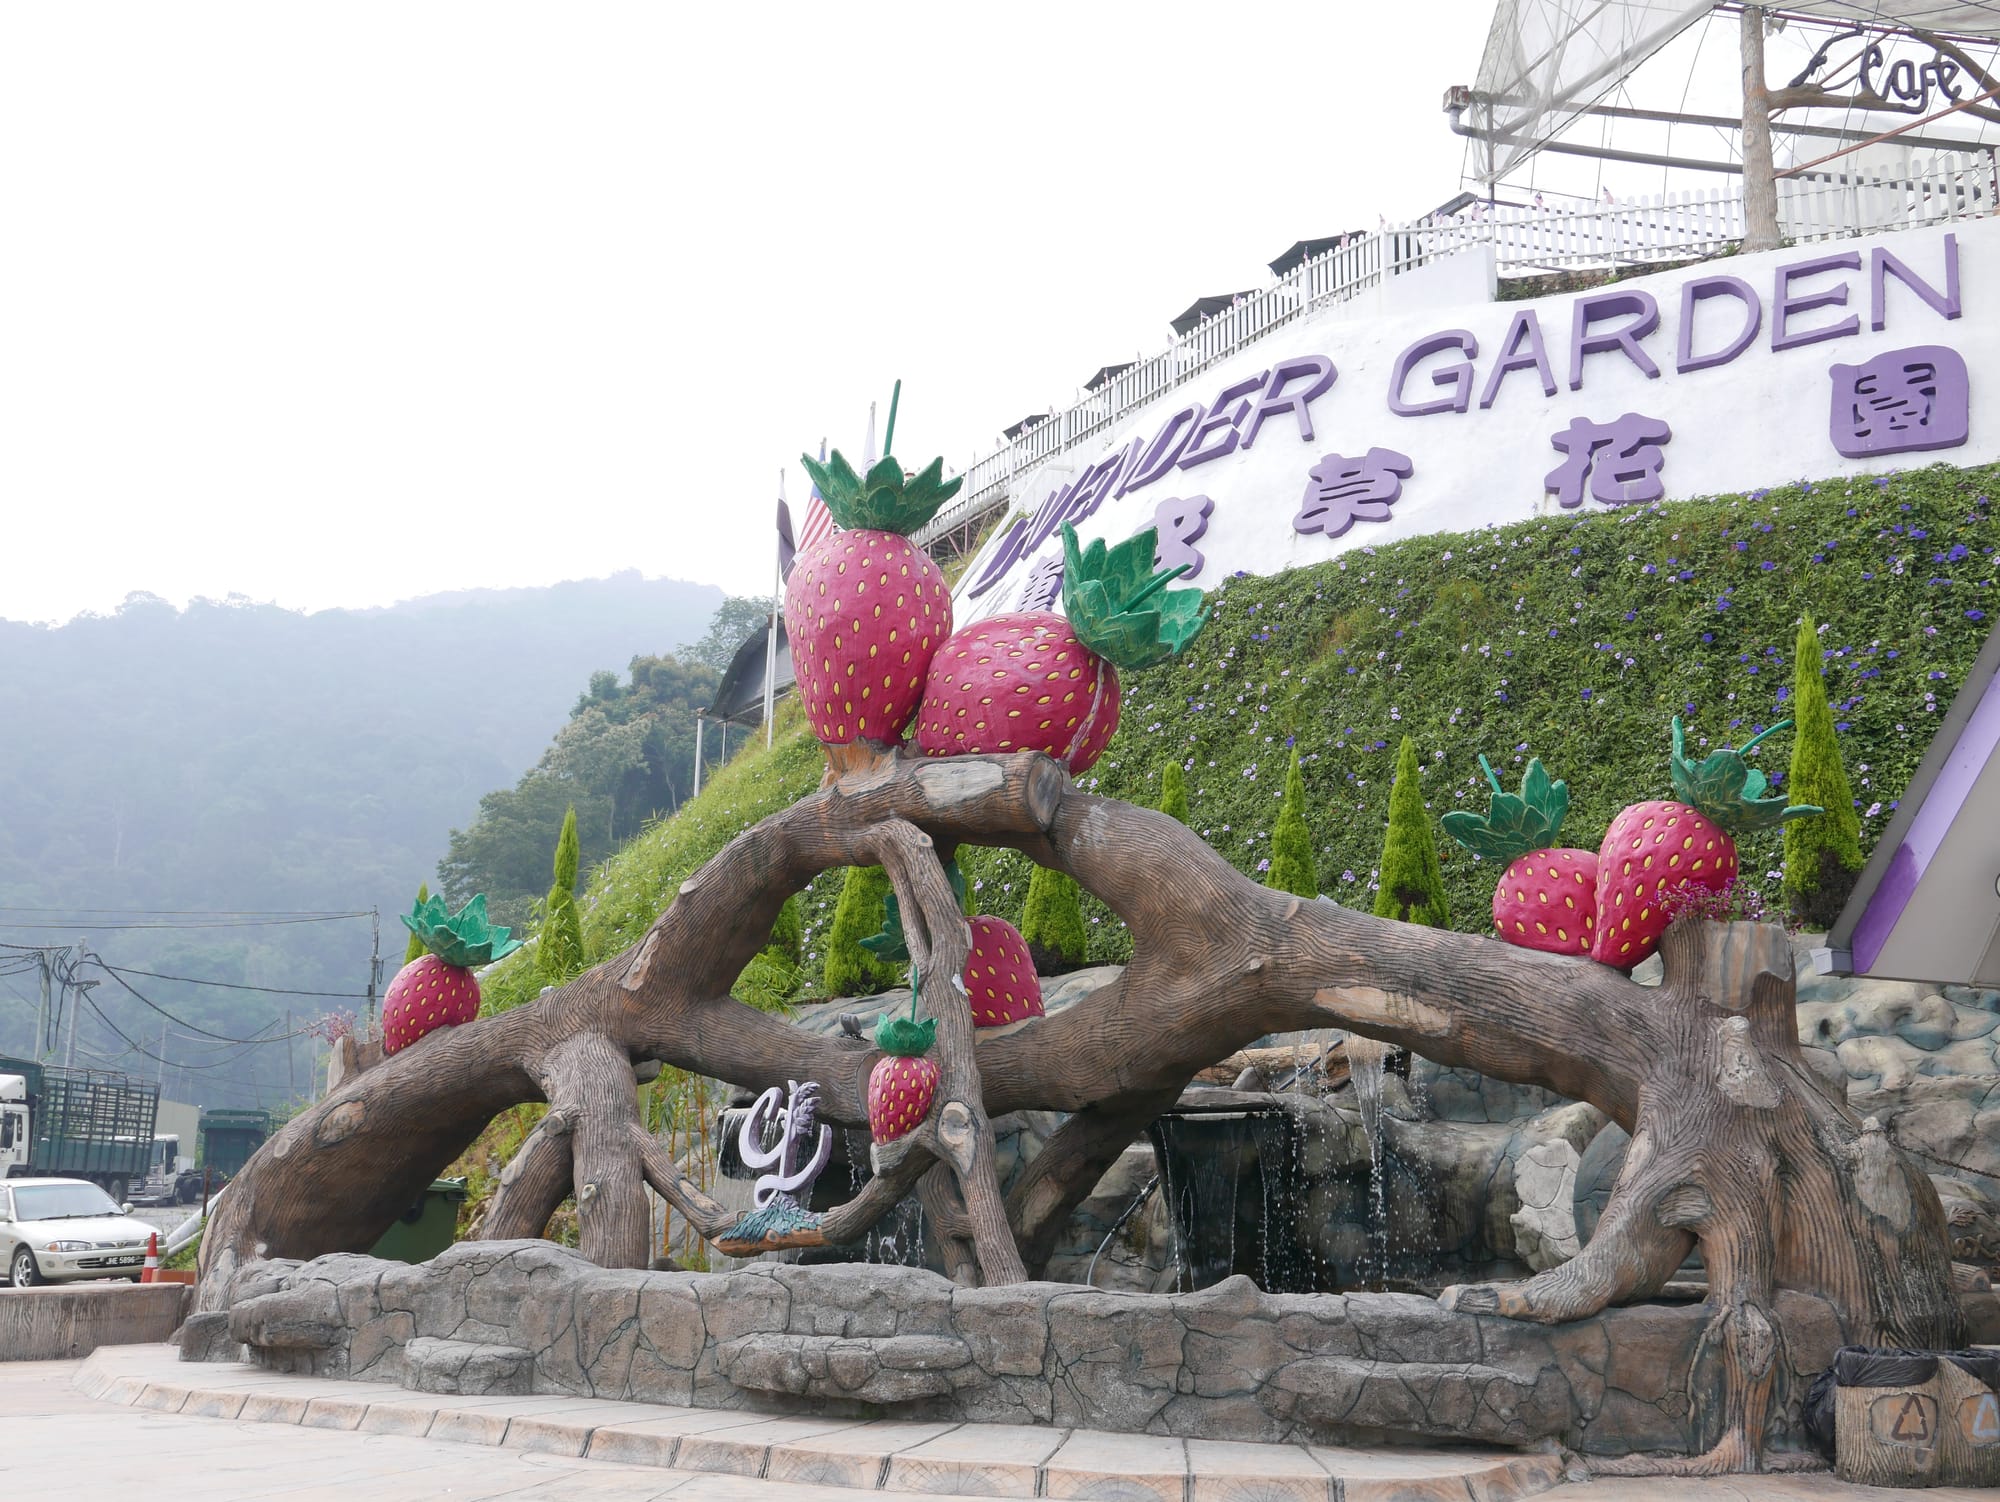 Photo by Author — the entrance to the Cameron Lavender Garden, The Highlands, Malaysia